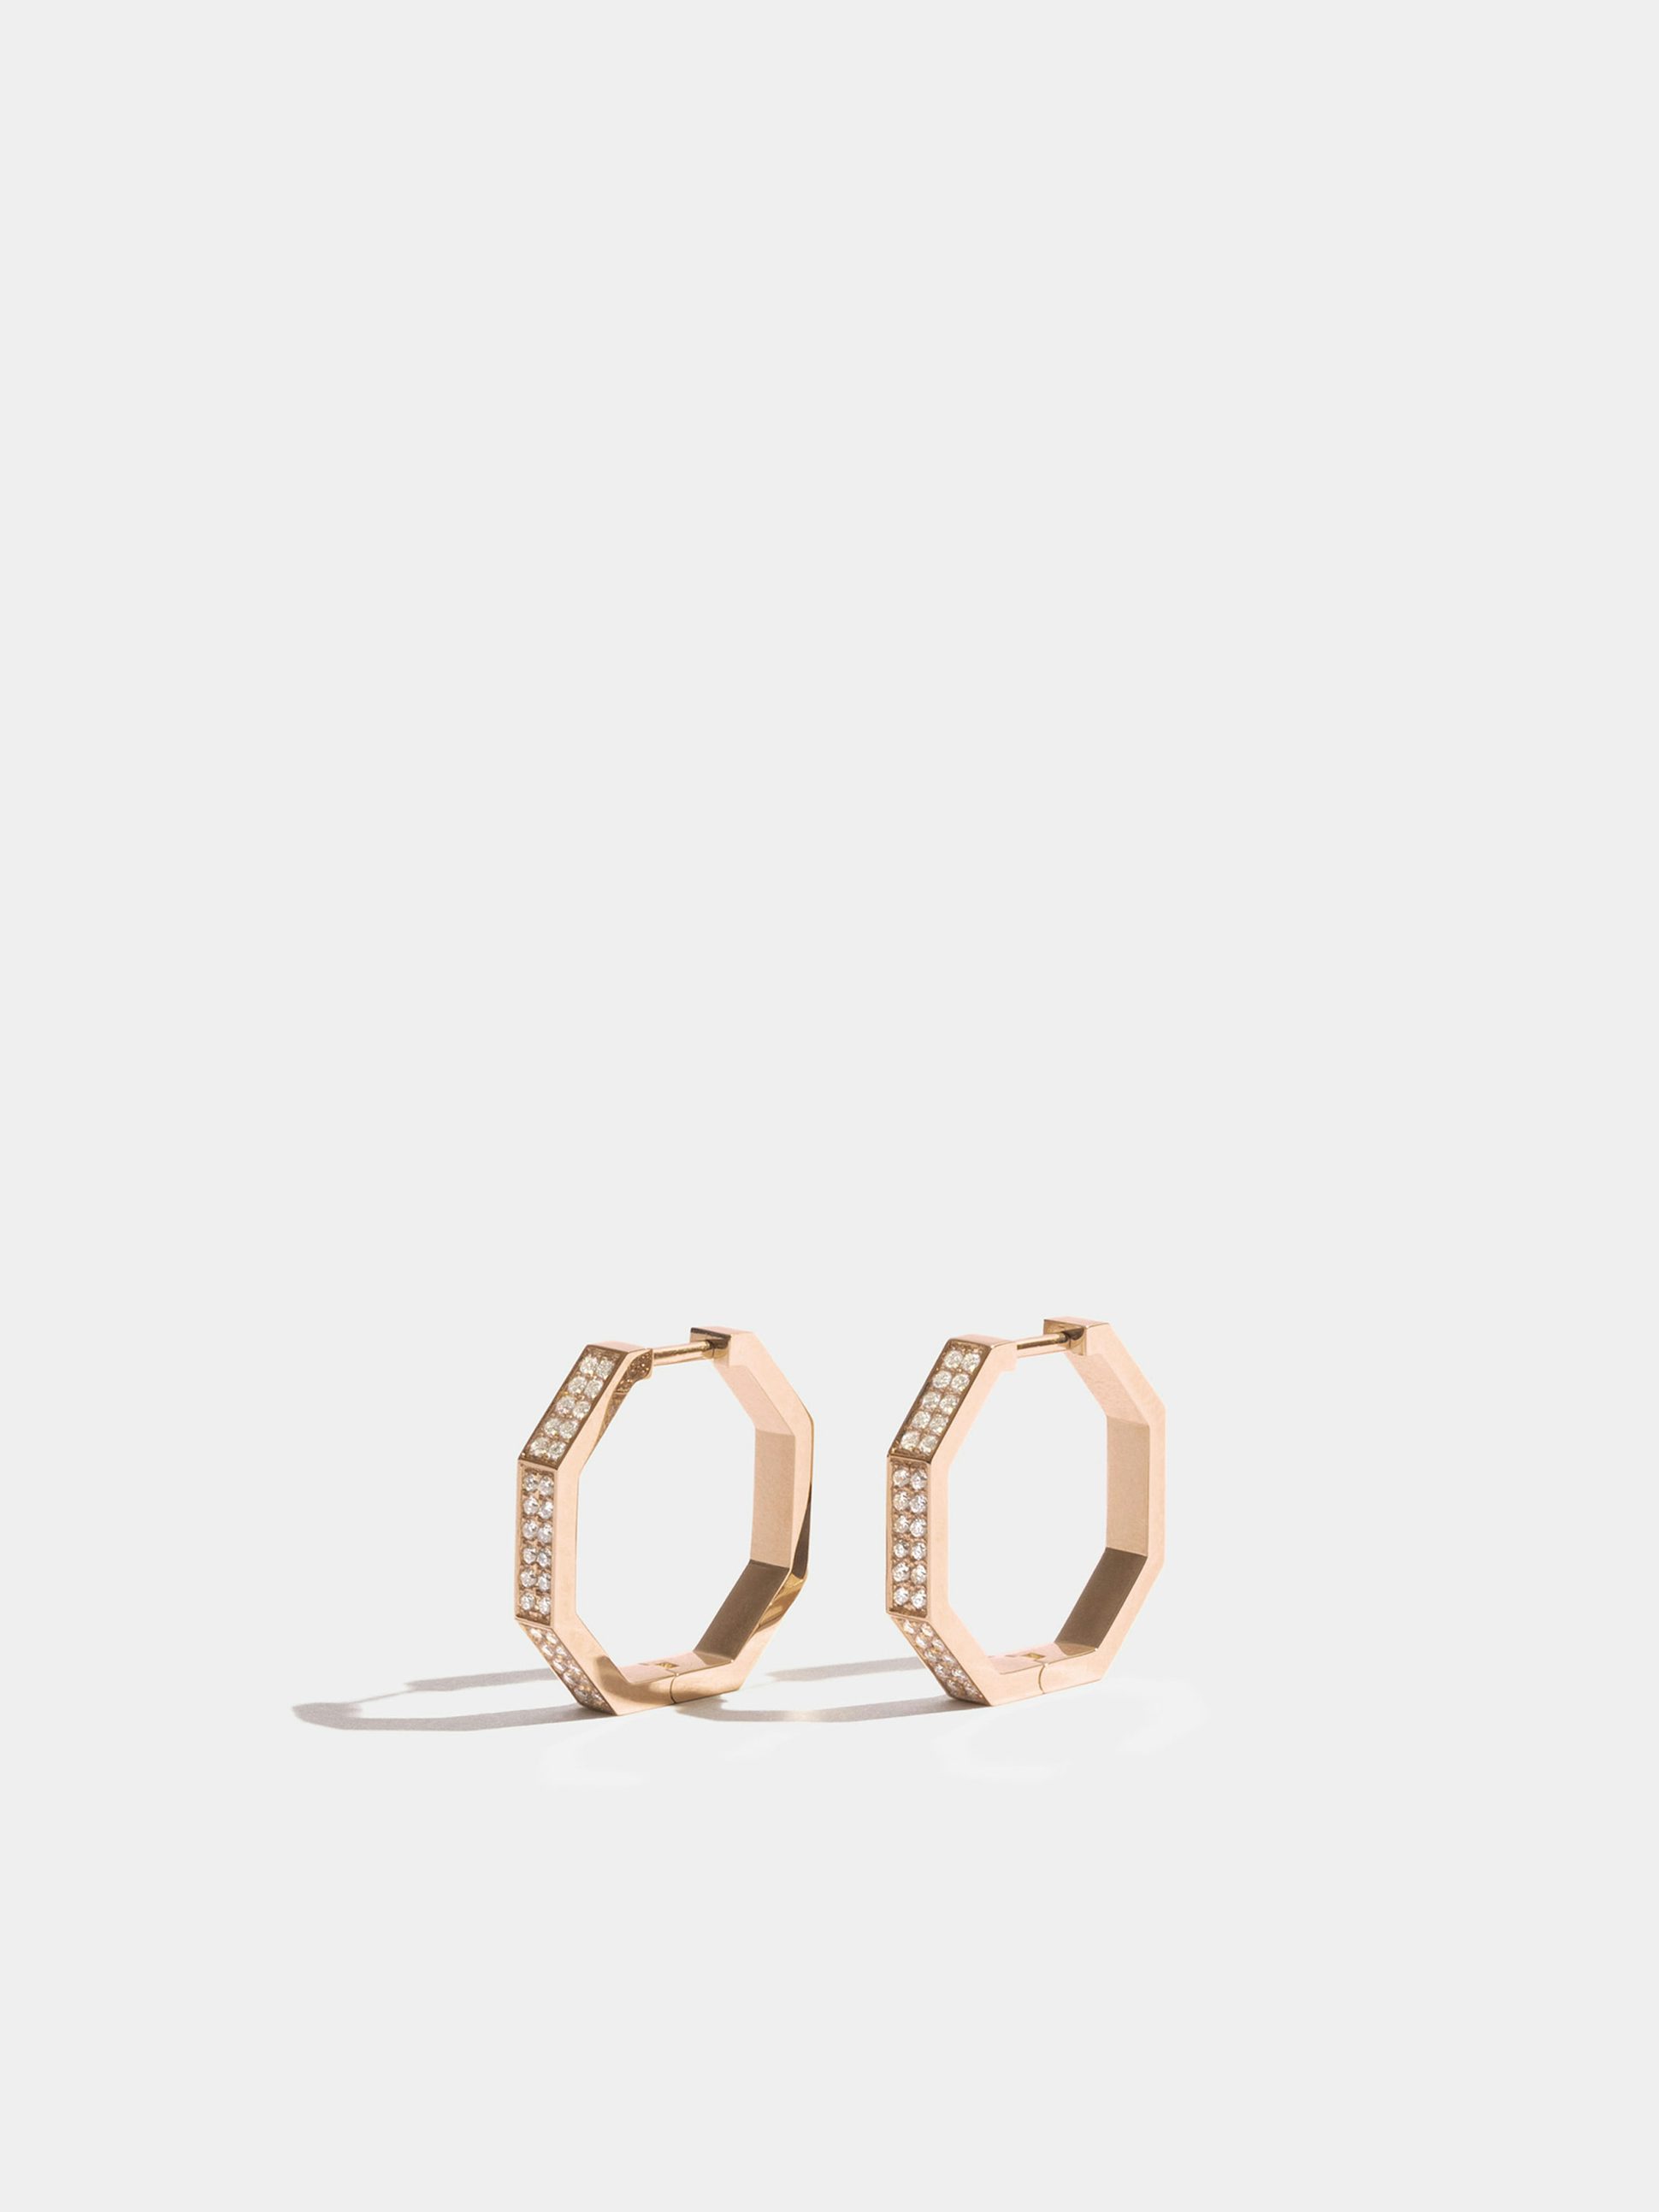 Octogone 18mm earrings in 18k Fairmined ethical rose gold, paved with lab-grown diamonds, the pair.